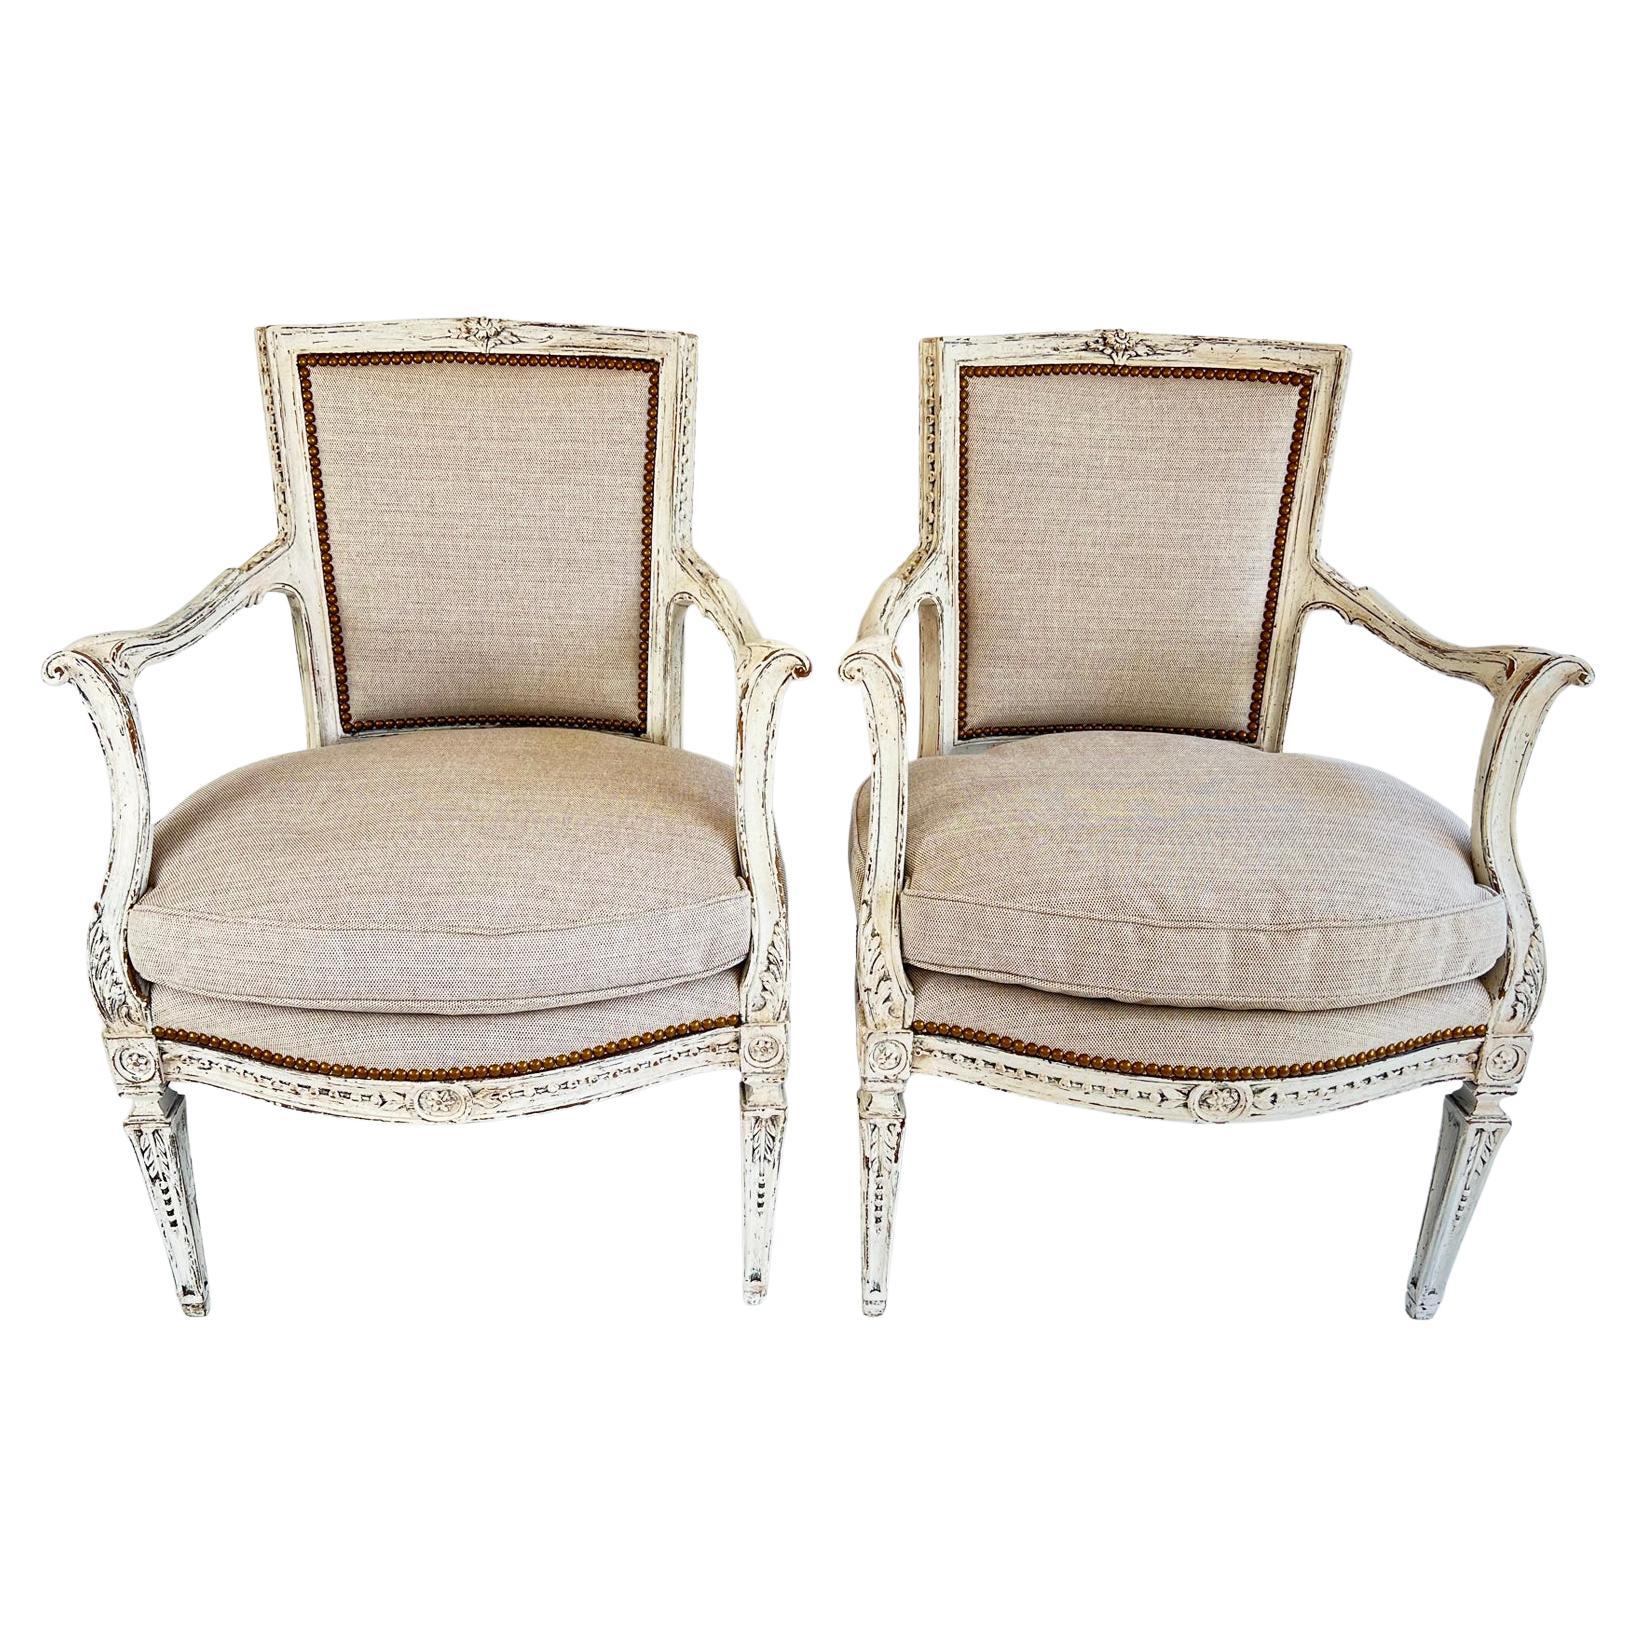 Pair of Uniquely Carved, Painted Italian Armchairs